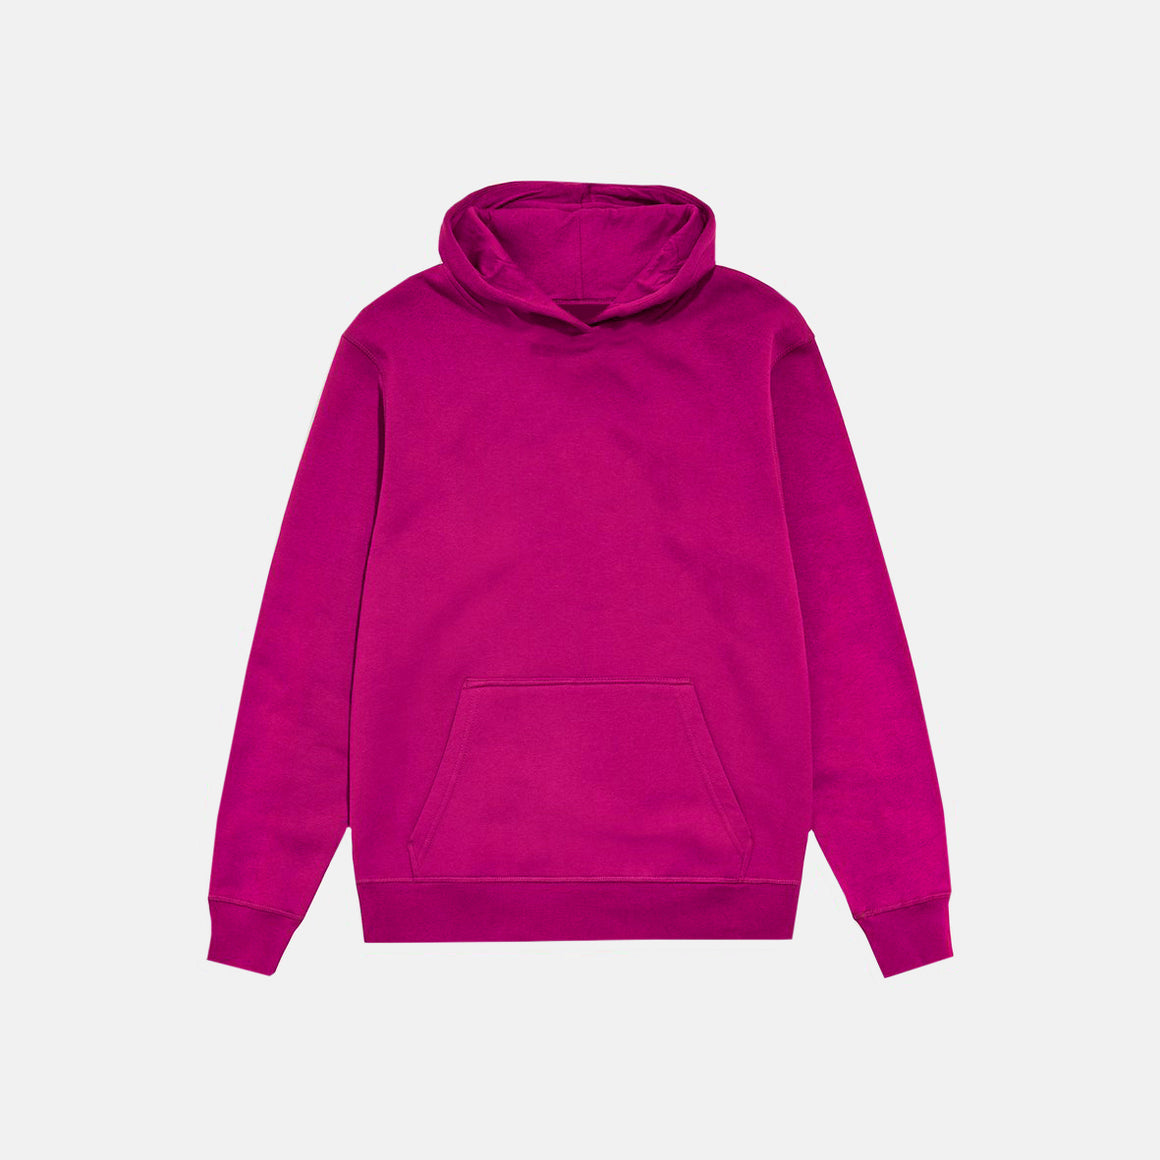 54 FLORAL PREMIUM PULLOVER HOODY - HOT FUCHSIA PINK